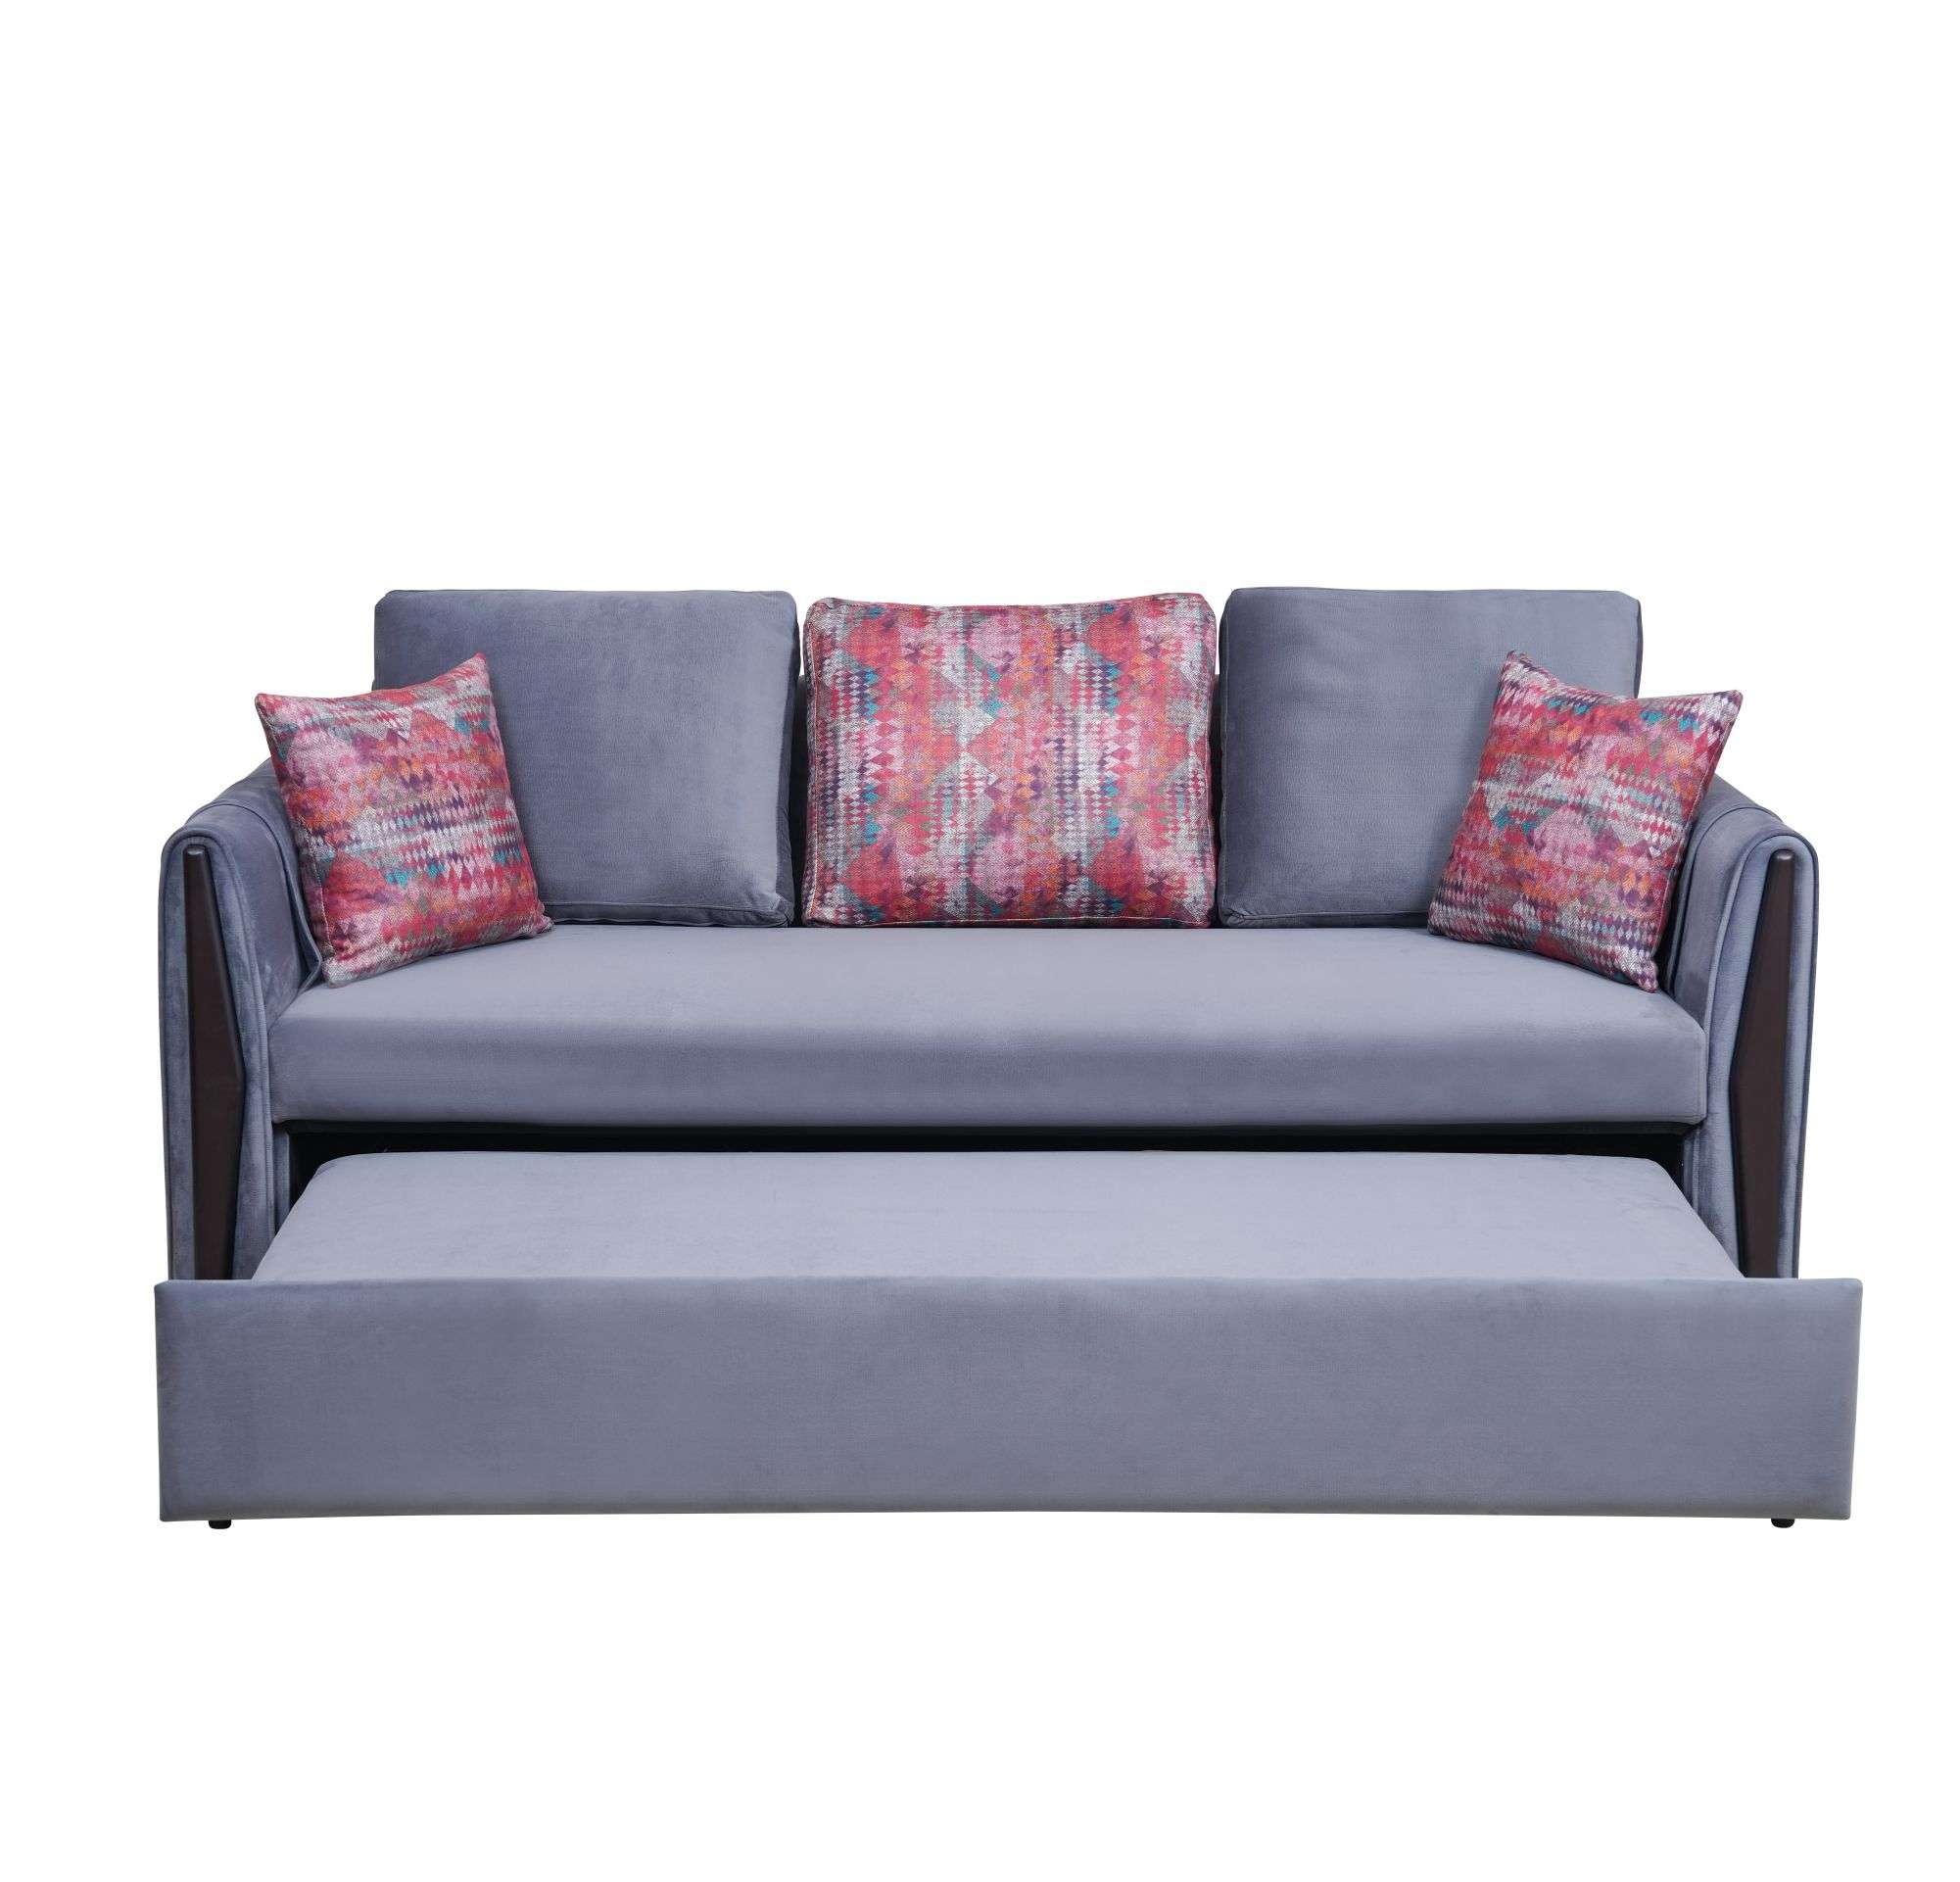 LVESCBAS003-Asterix Three seater sofa bed with Two Pillows-Grey